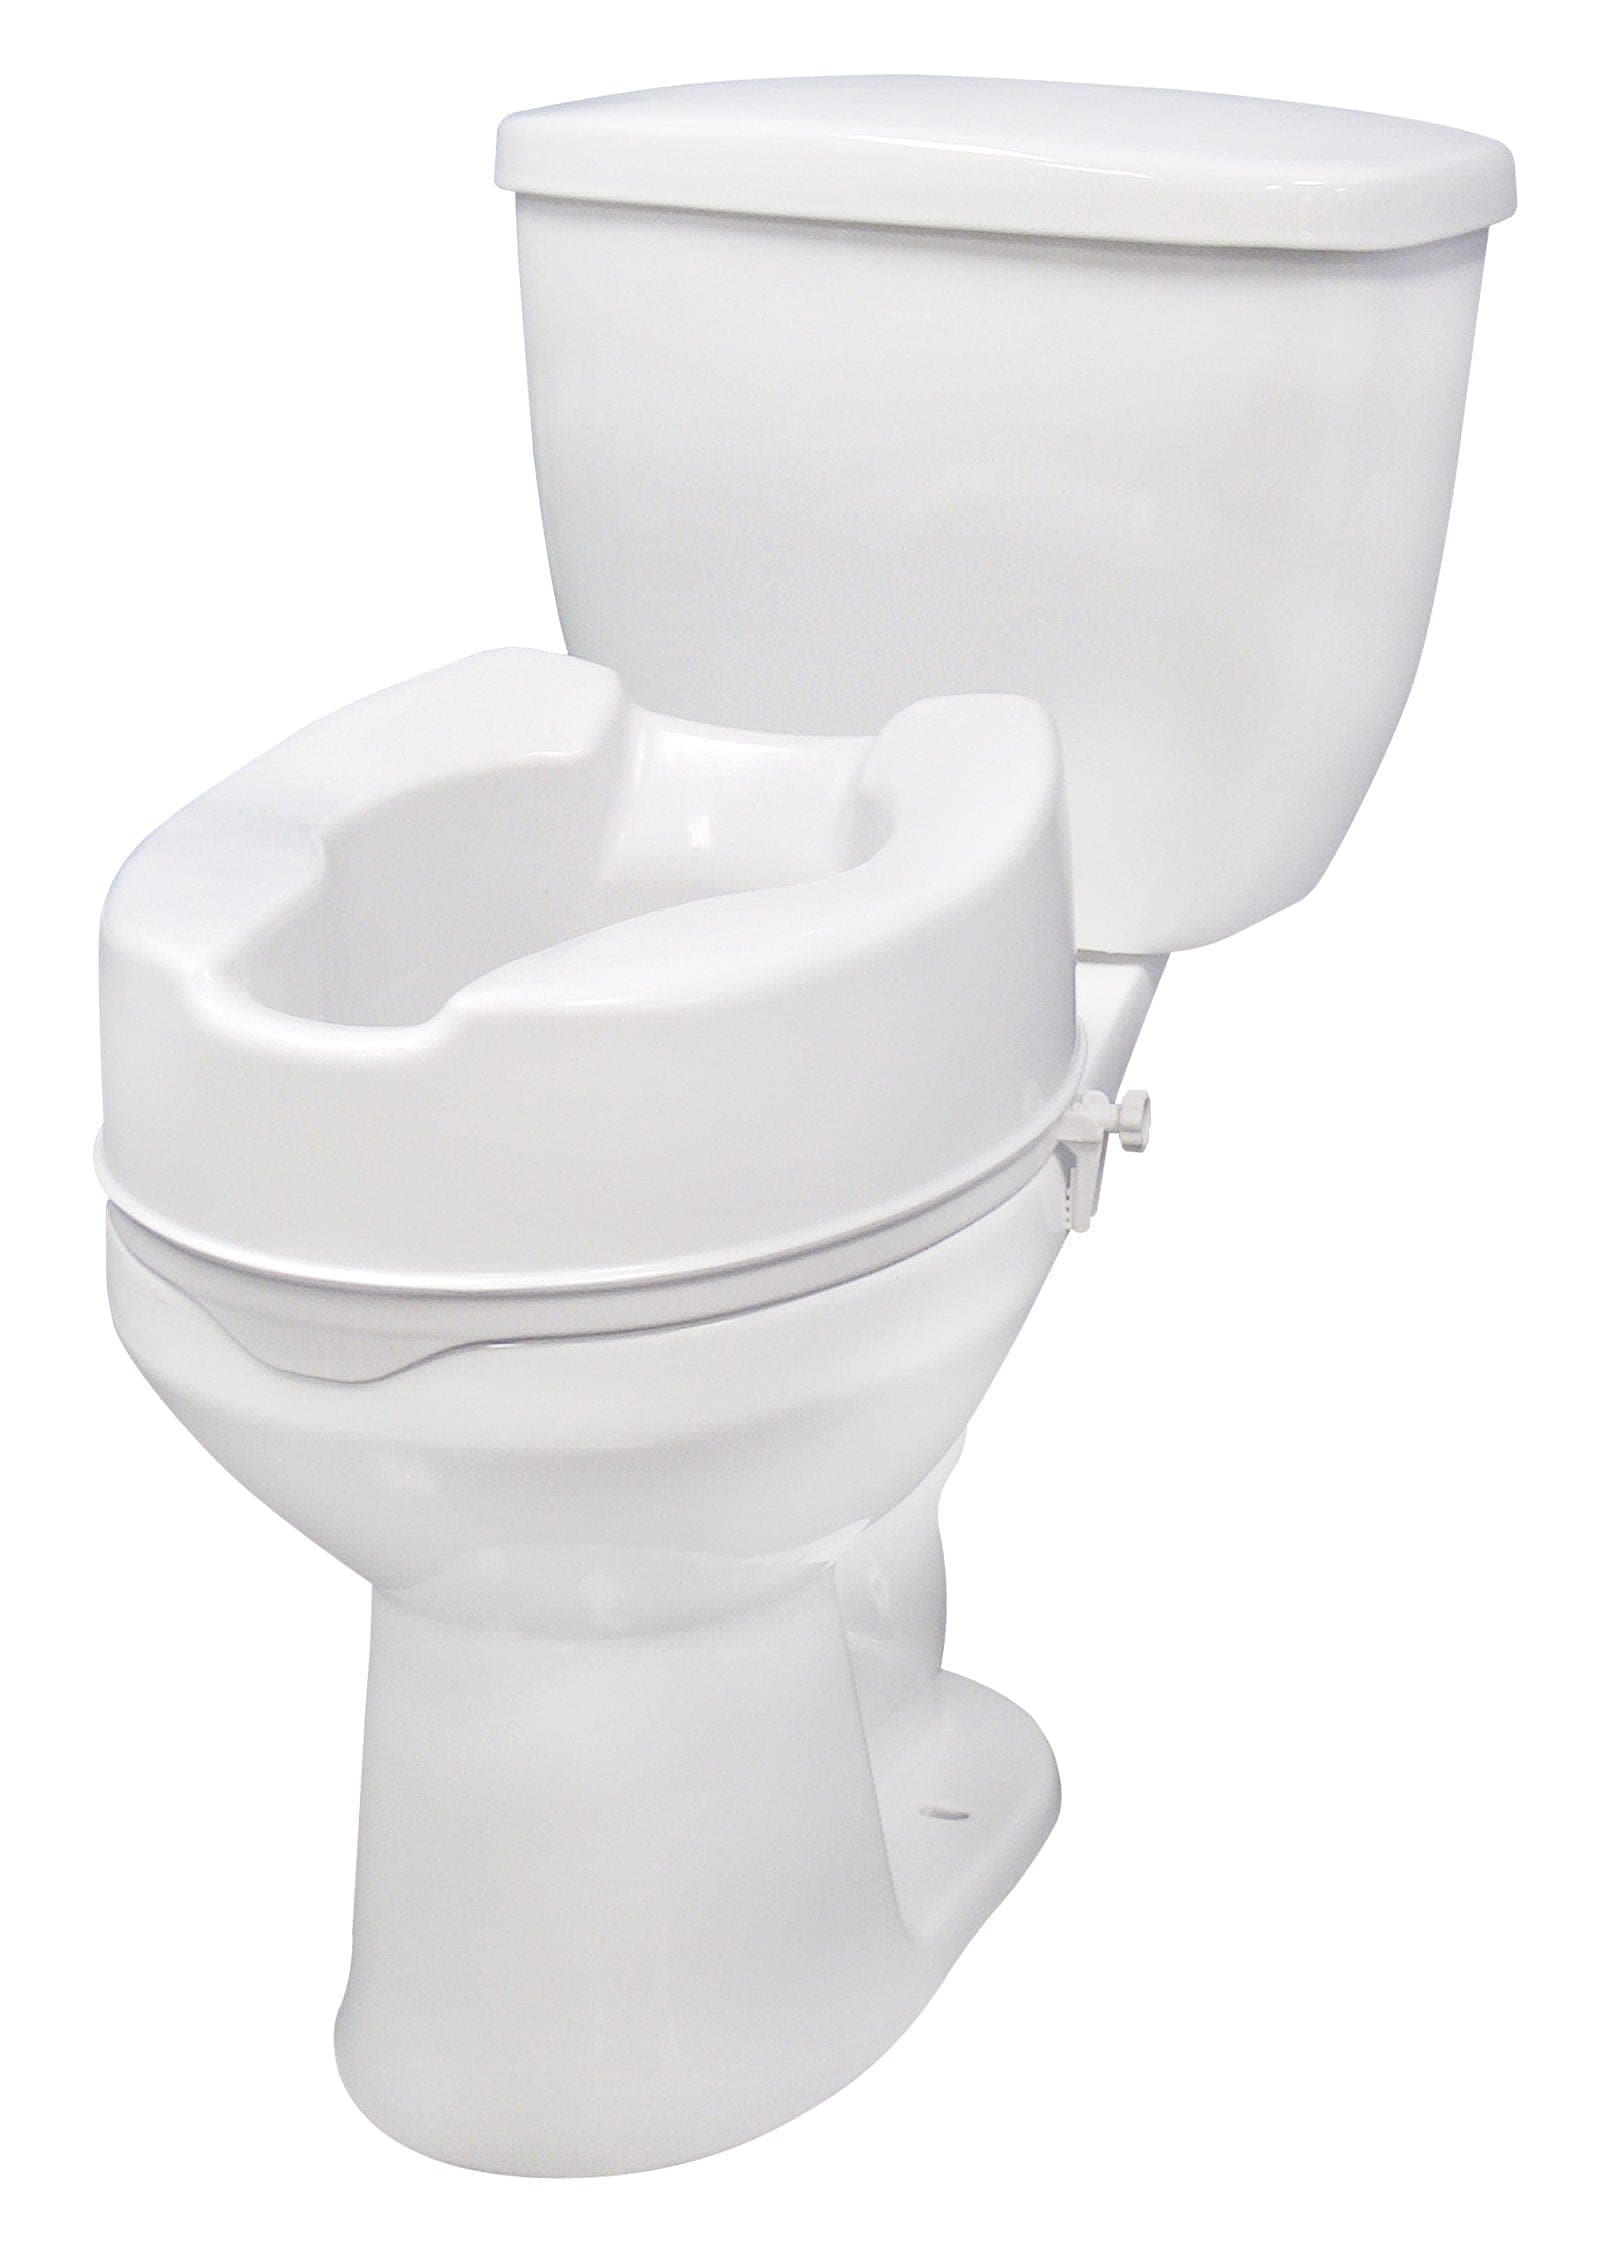 Drive Medical Bathroom Safety Drive Medical Raised Toilet Seat with Lock, Standard Seat